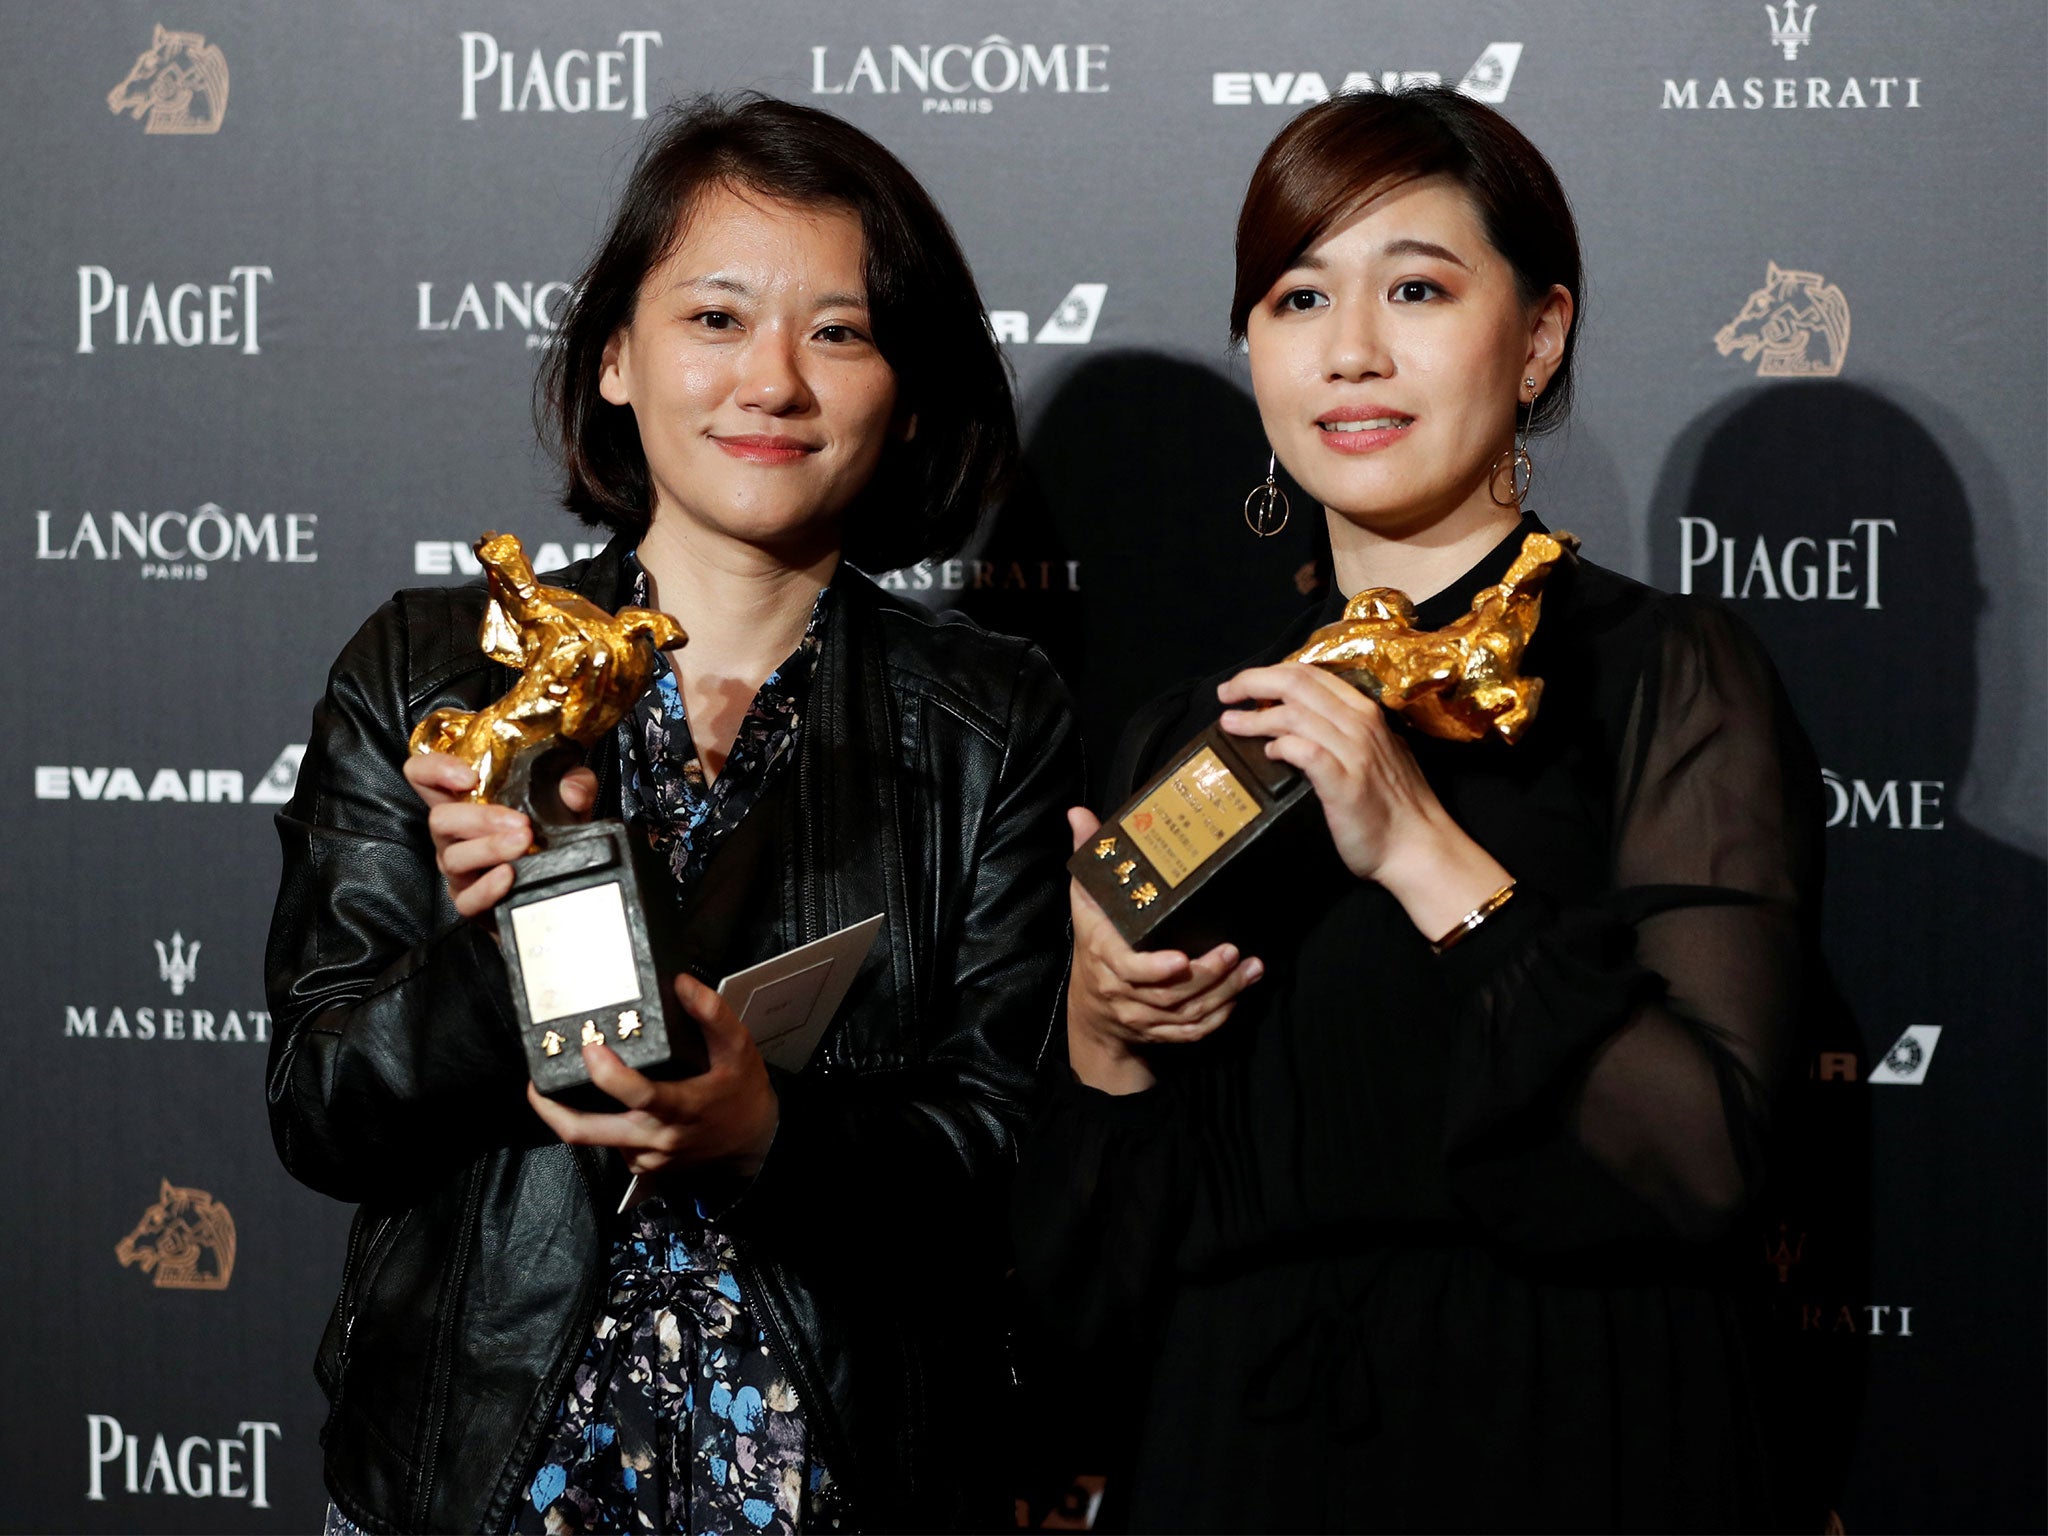 Live coverage of ‘Chinese Oscars’ cut off after winning director calls for Taiwan independence Chinese-oscars